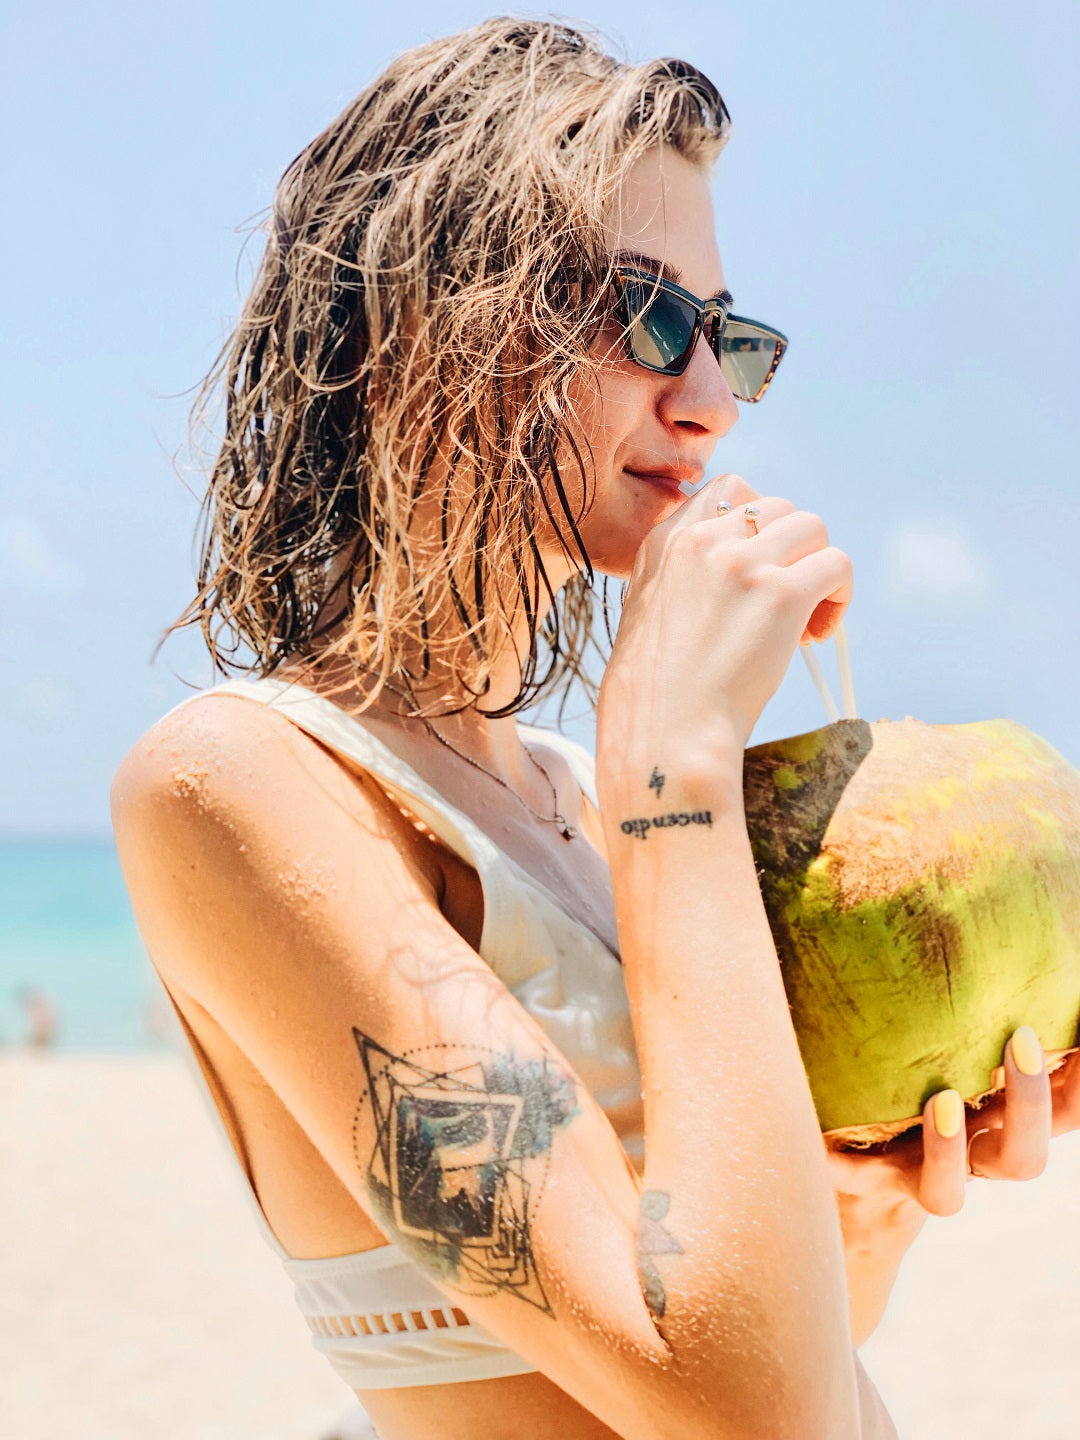 The Dos and Don'ts of Getting a Tattoo on Holiday